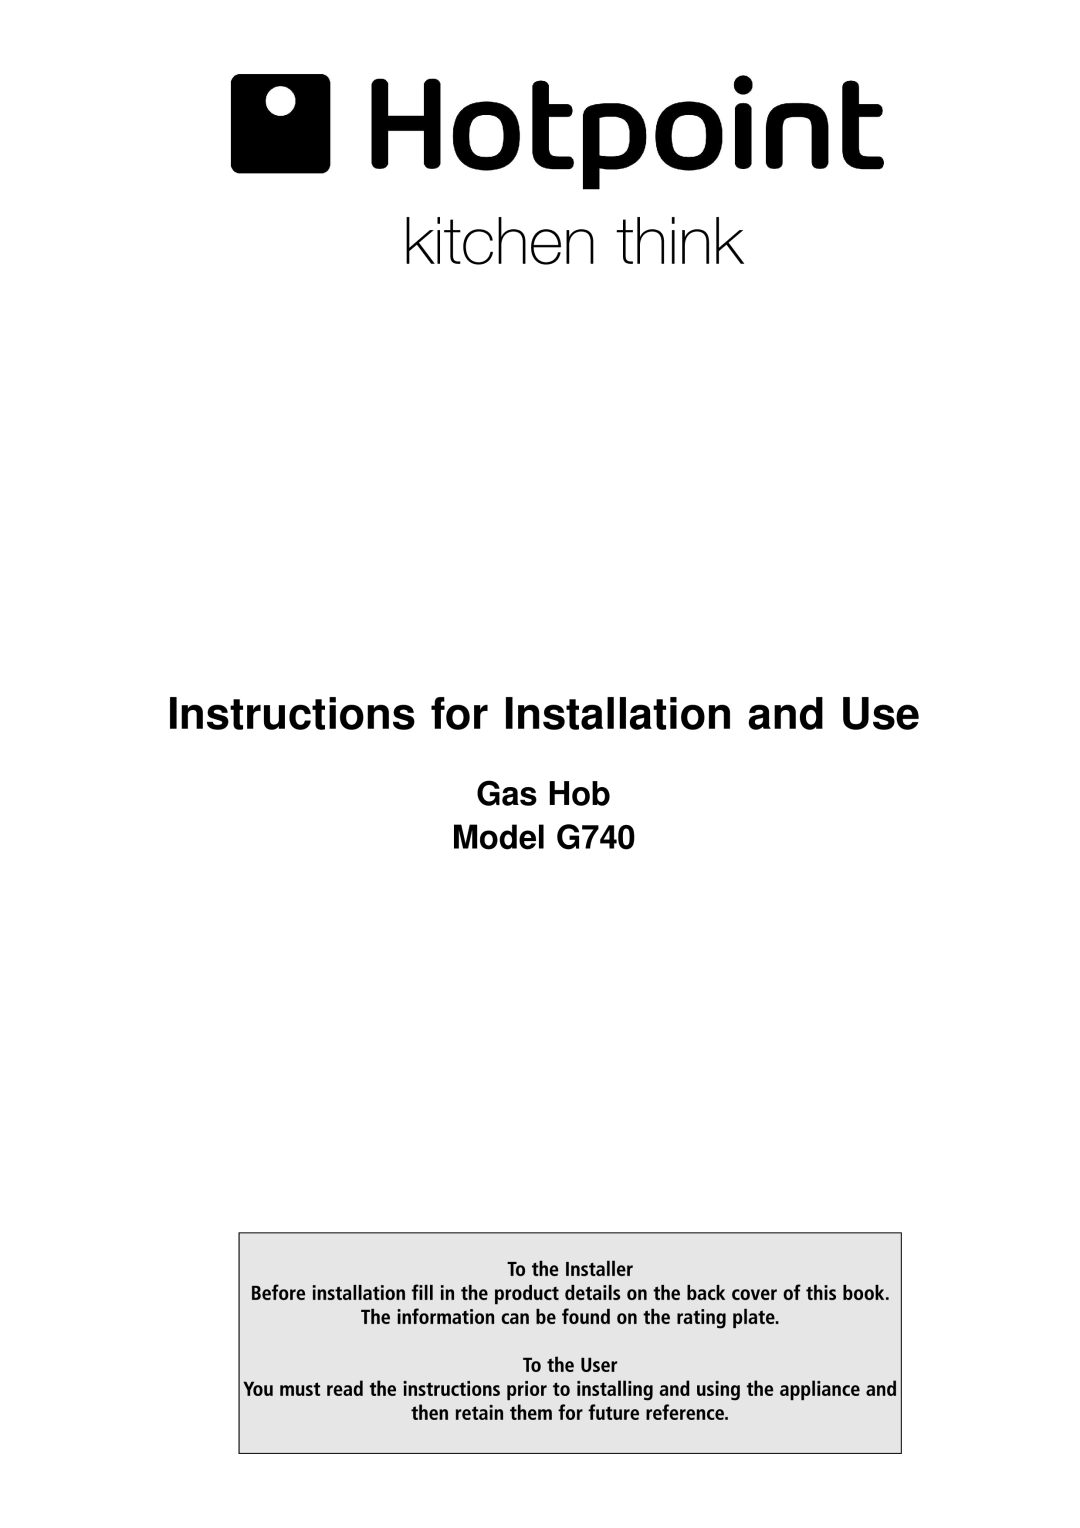 Hotpoint manual Gas Hob Model G740, Instructions for Installation and Use 